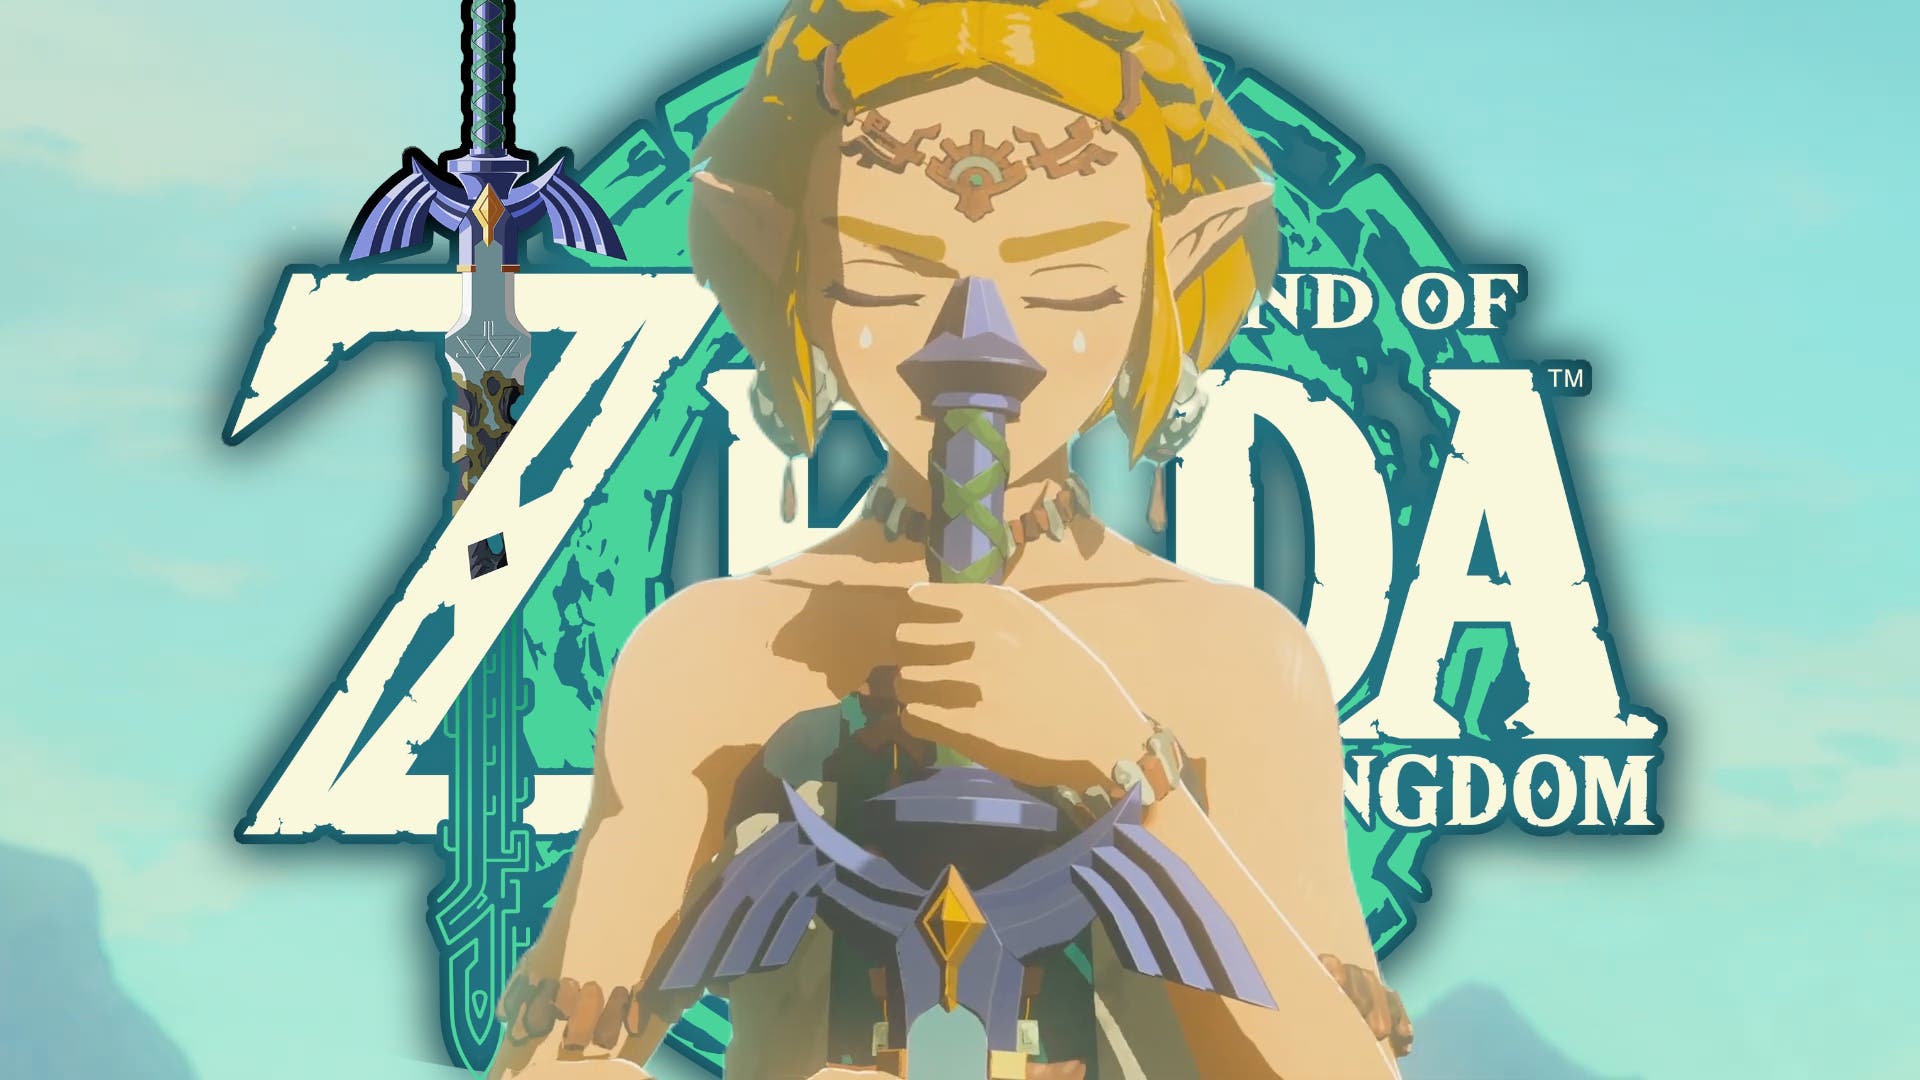 Zelda: Tears of the Kingdom dazzles with its incredible final trailer full of old acquaintances and new faces